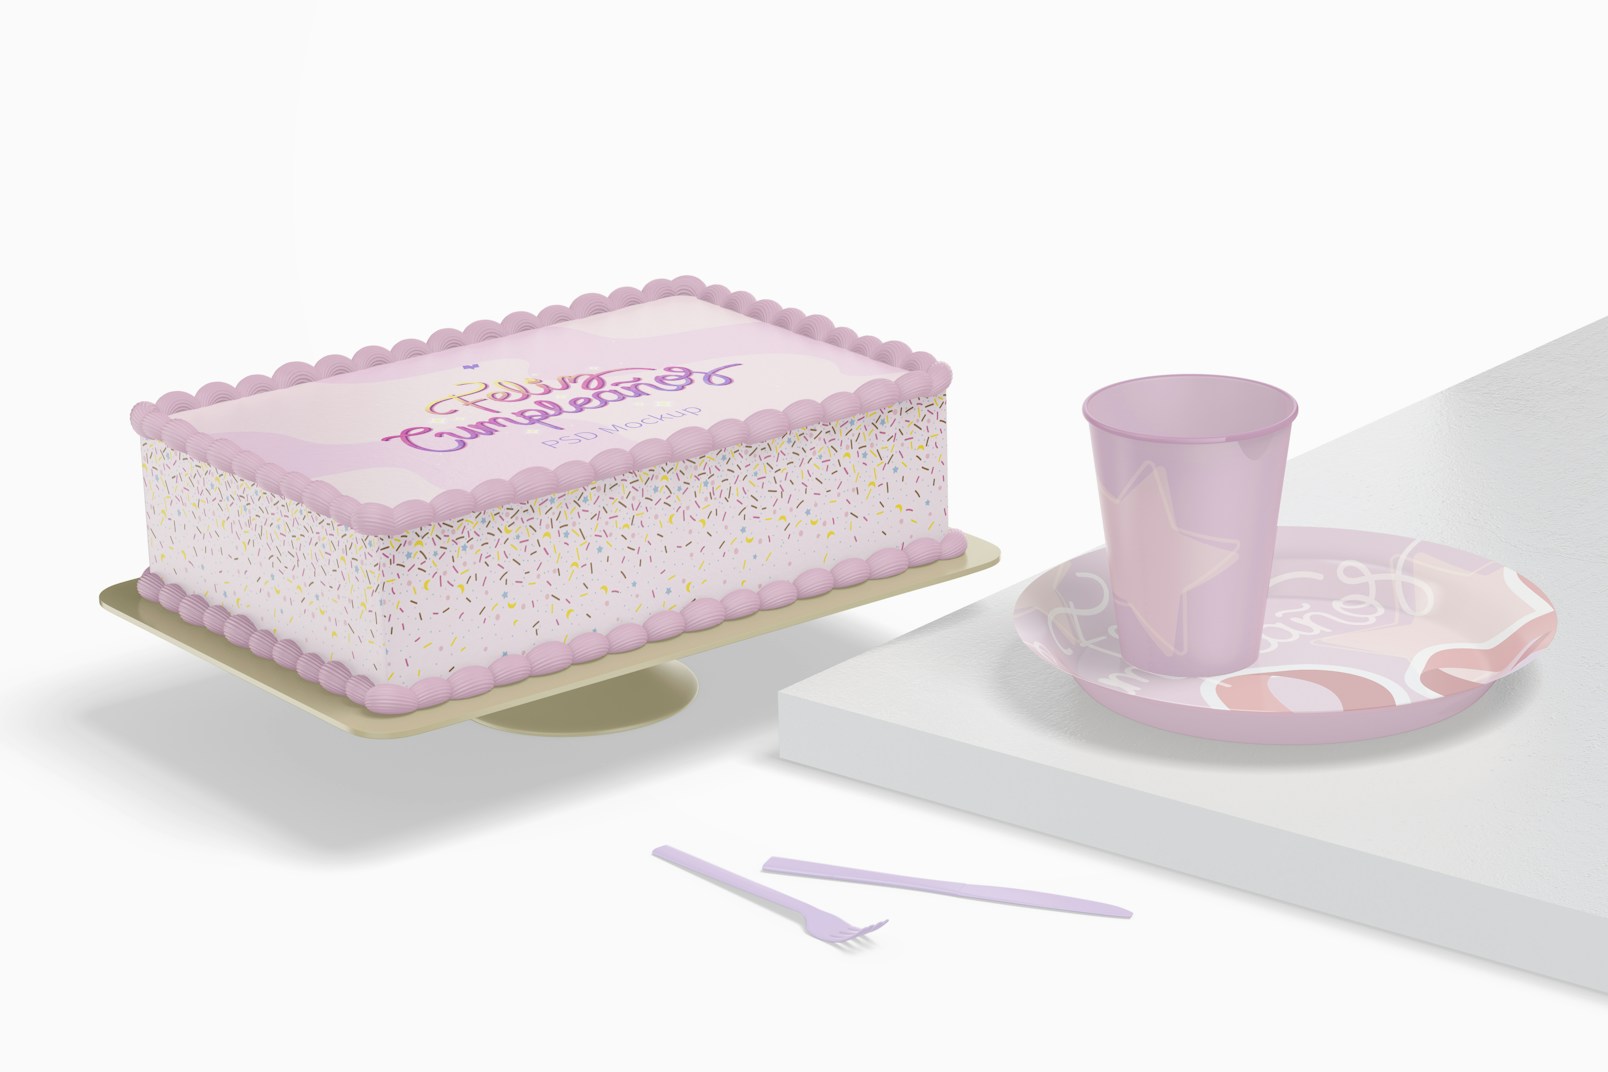 Square Cake with Plates Mockup